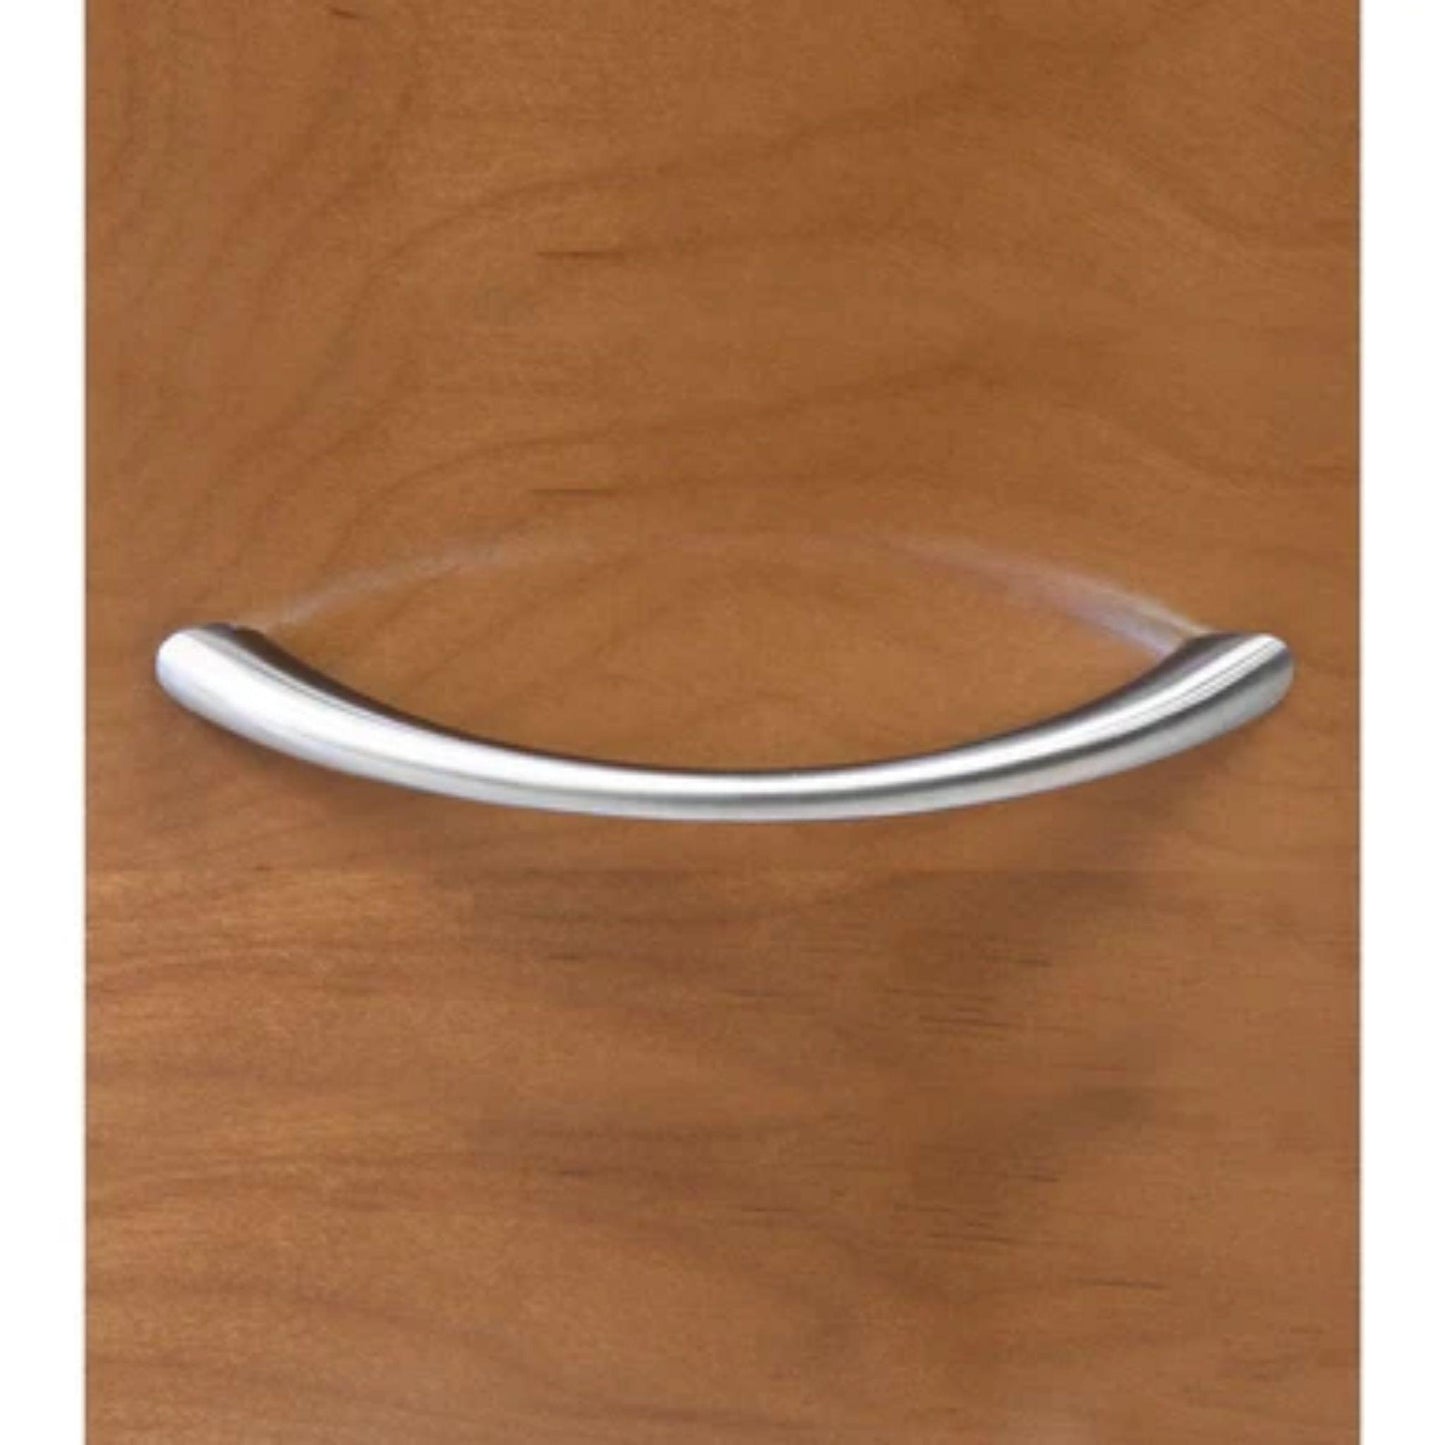 LessCare 4.375" Brushed Nickel Door/Drawer Pull